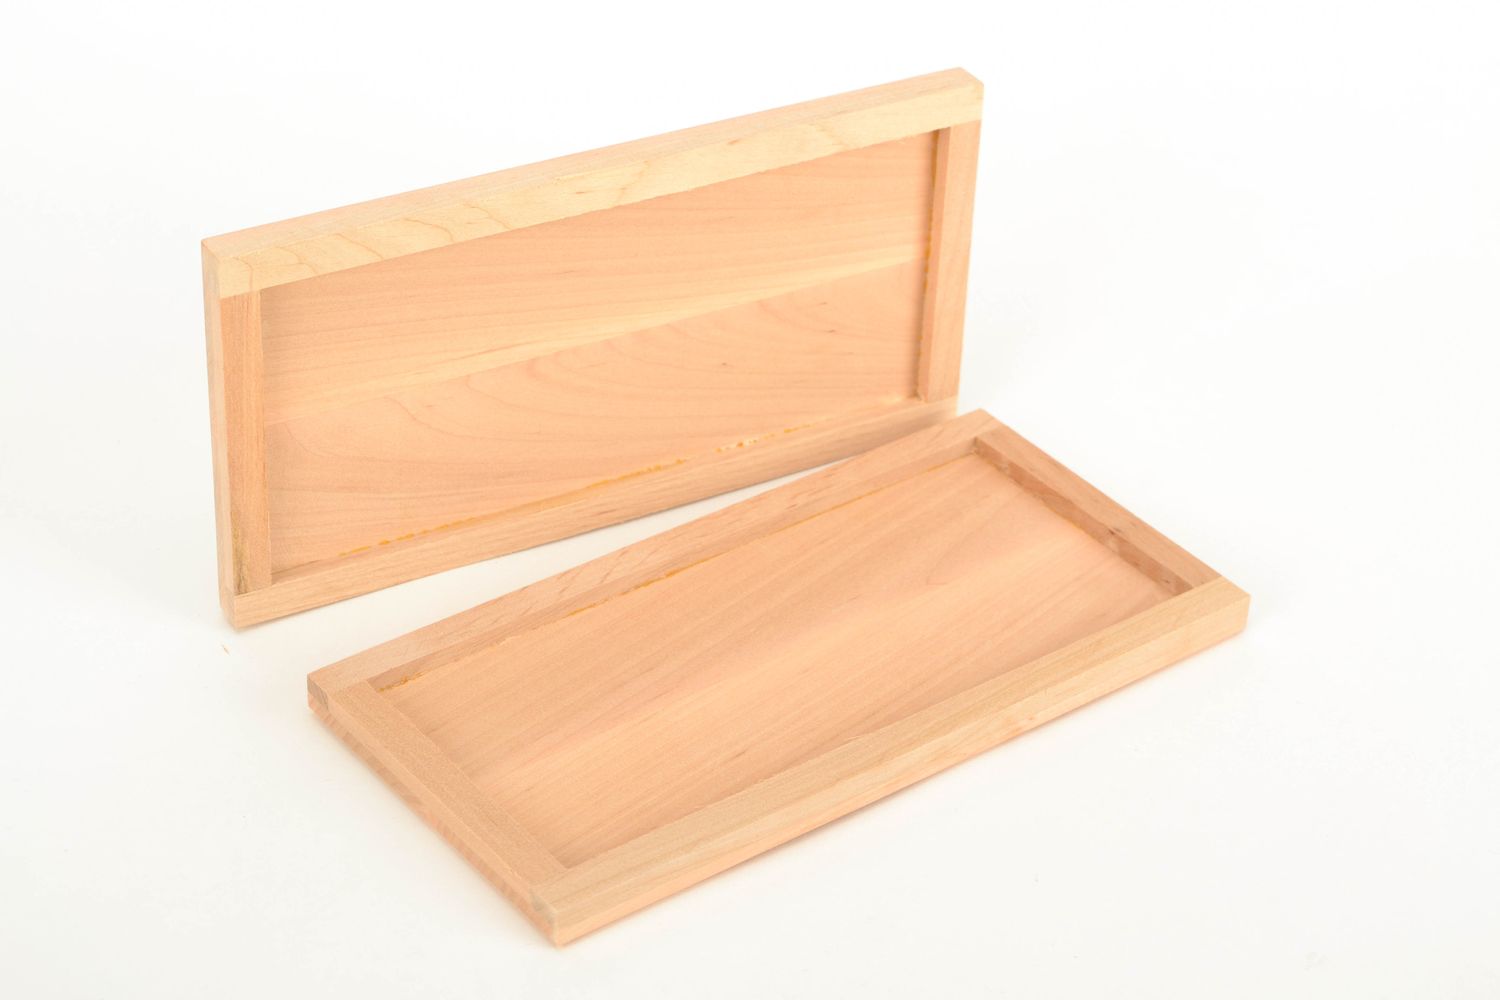 Alder wood craft blank for jewelry box photo 4